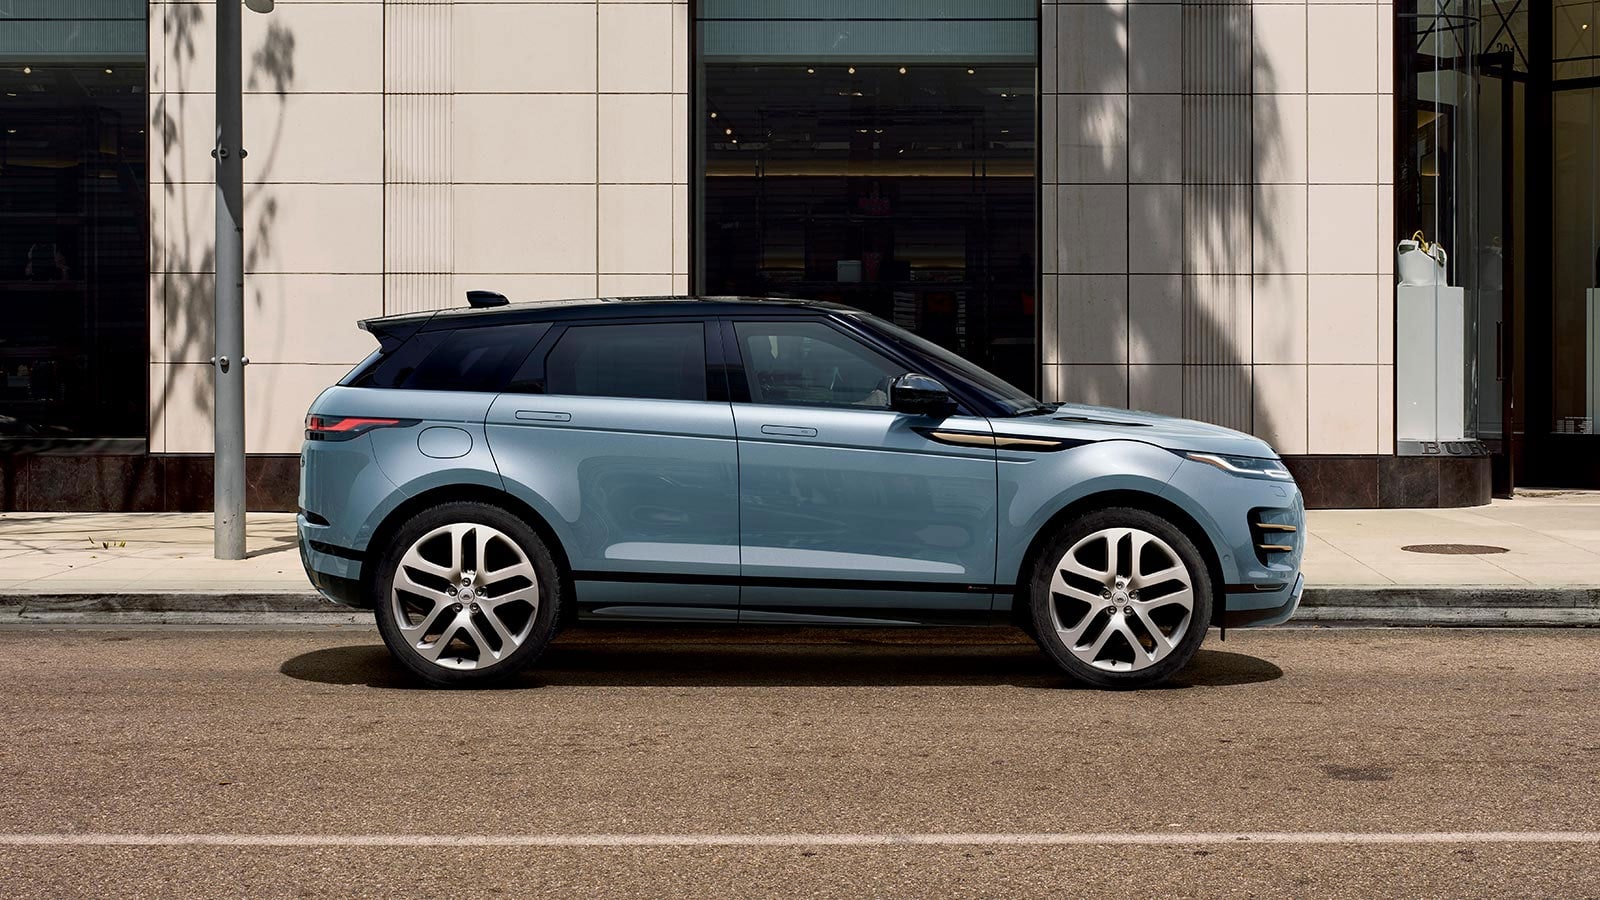 New Range Rover Evoque for sale at Land Rover Bedford